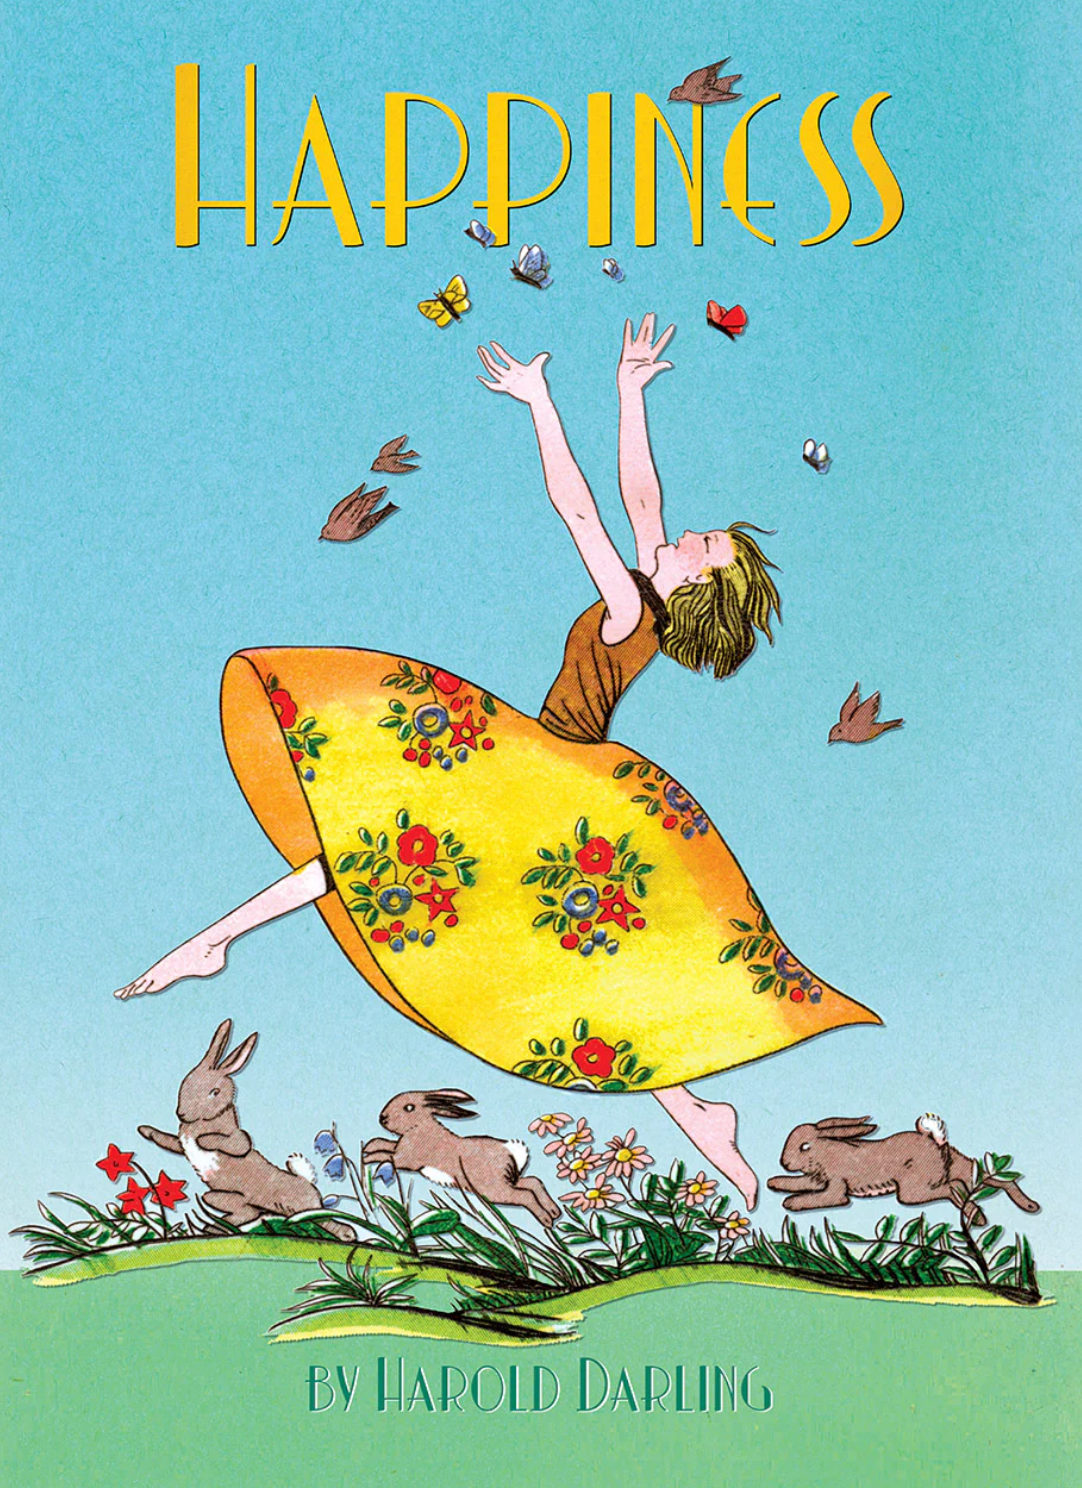 Happiness by Harold Darling book cover